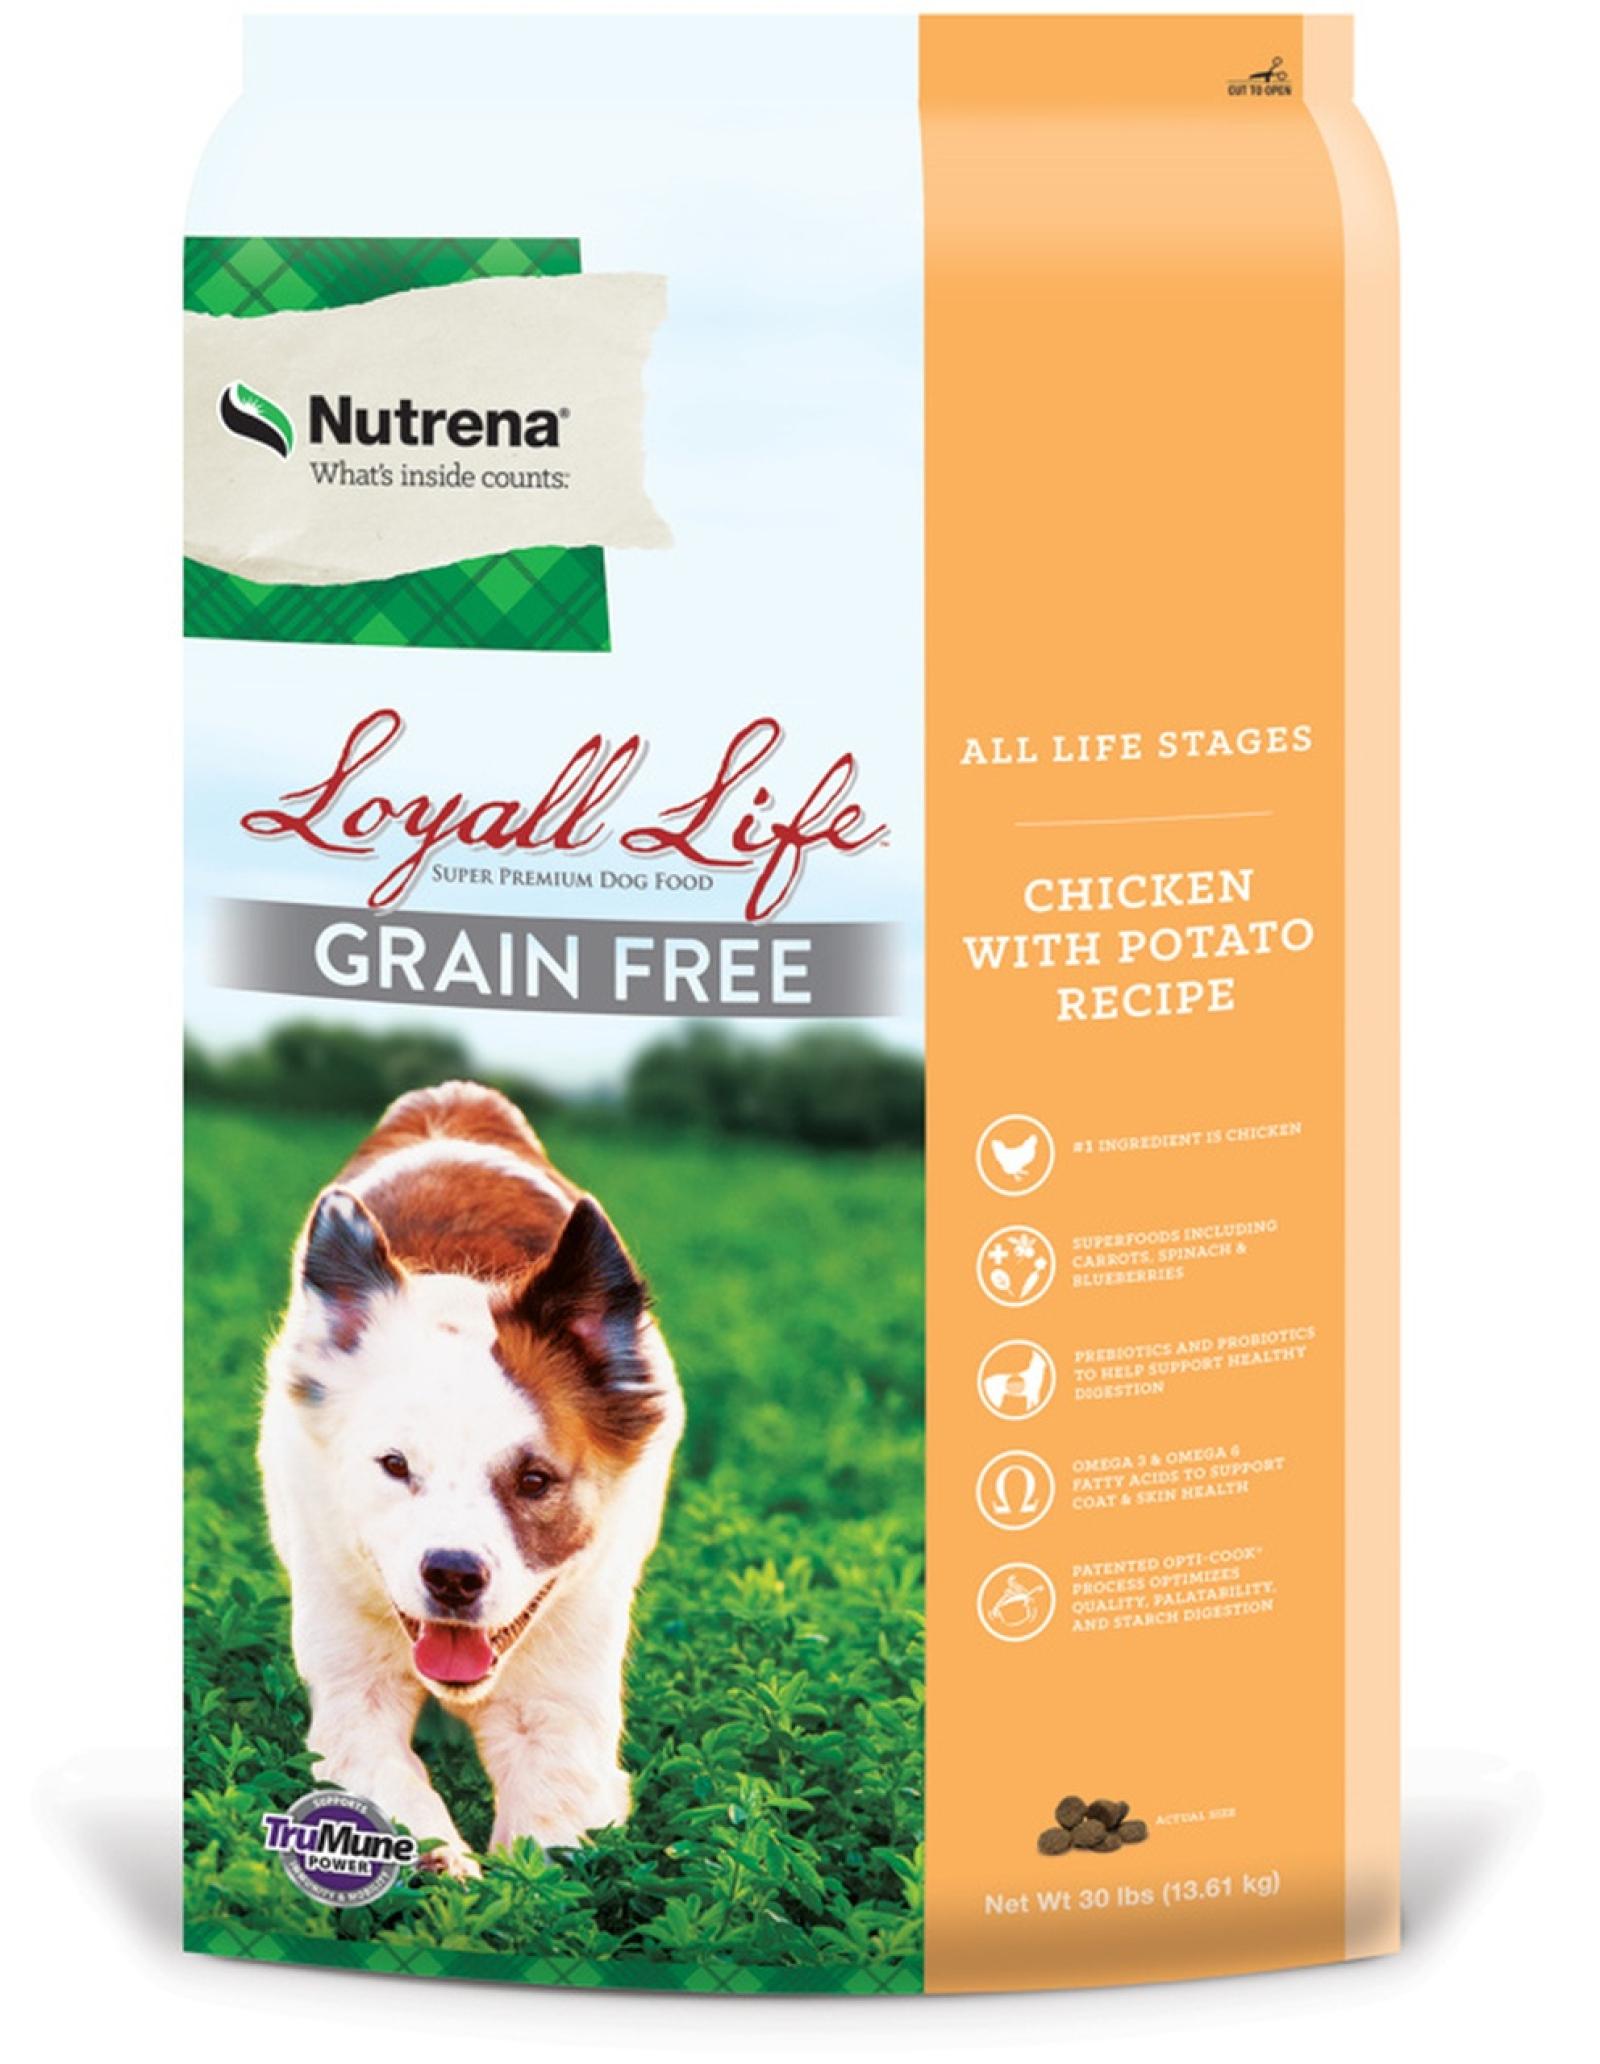 Nutrena Loyall Life Grain Free All Life Stages